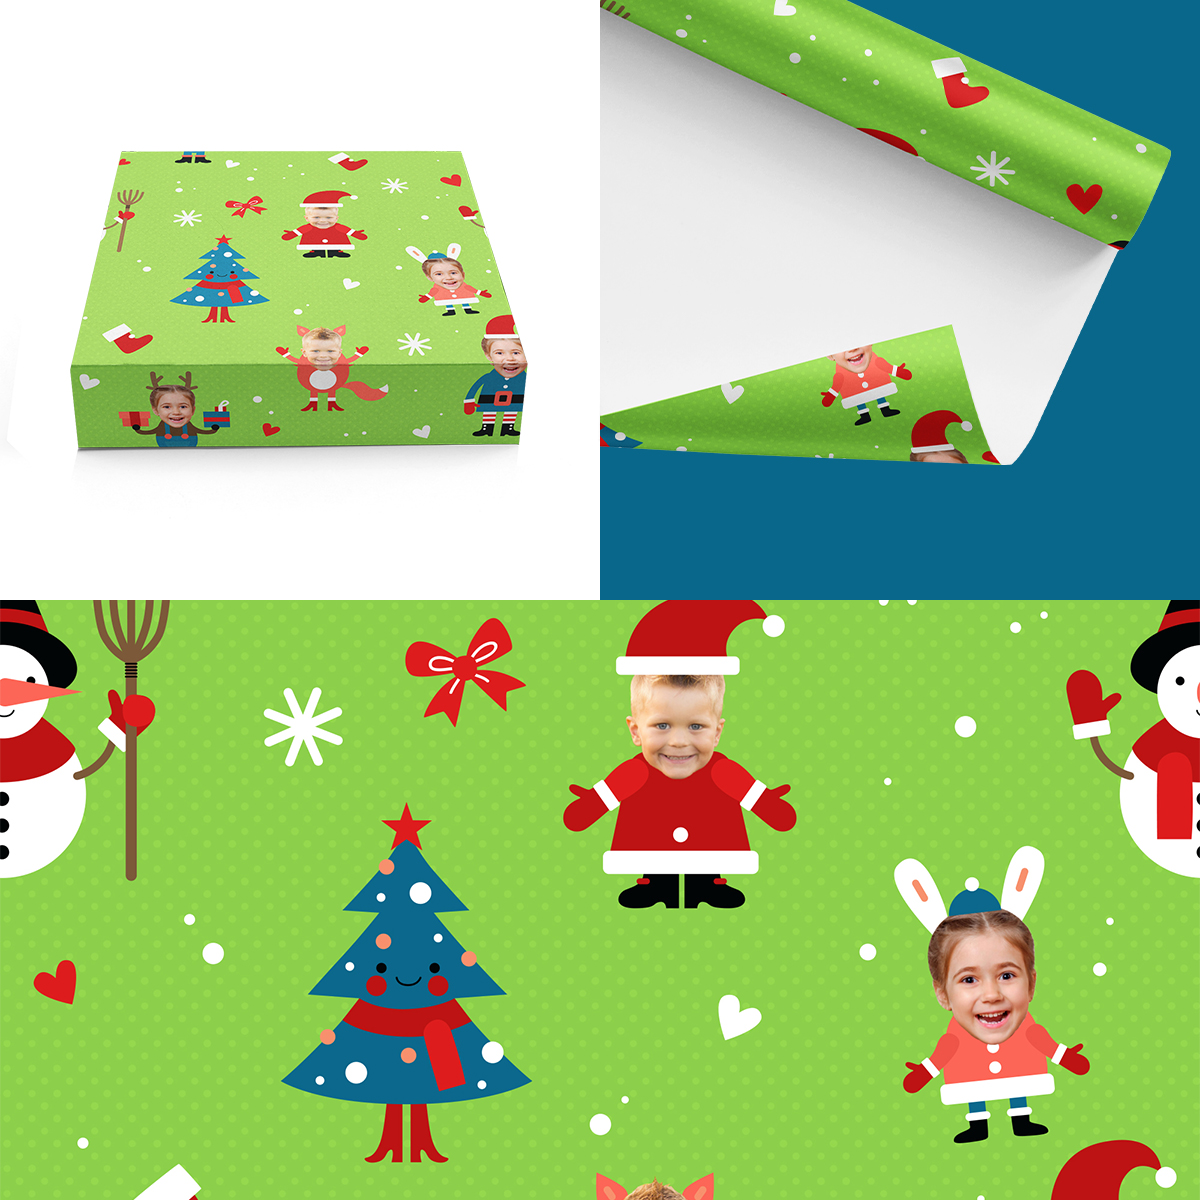 19-Piece Holiday Gift Wrapping Set - North Pole